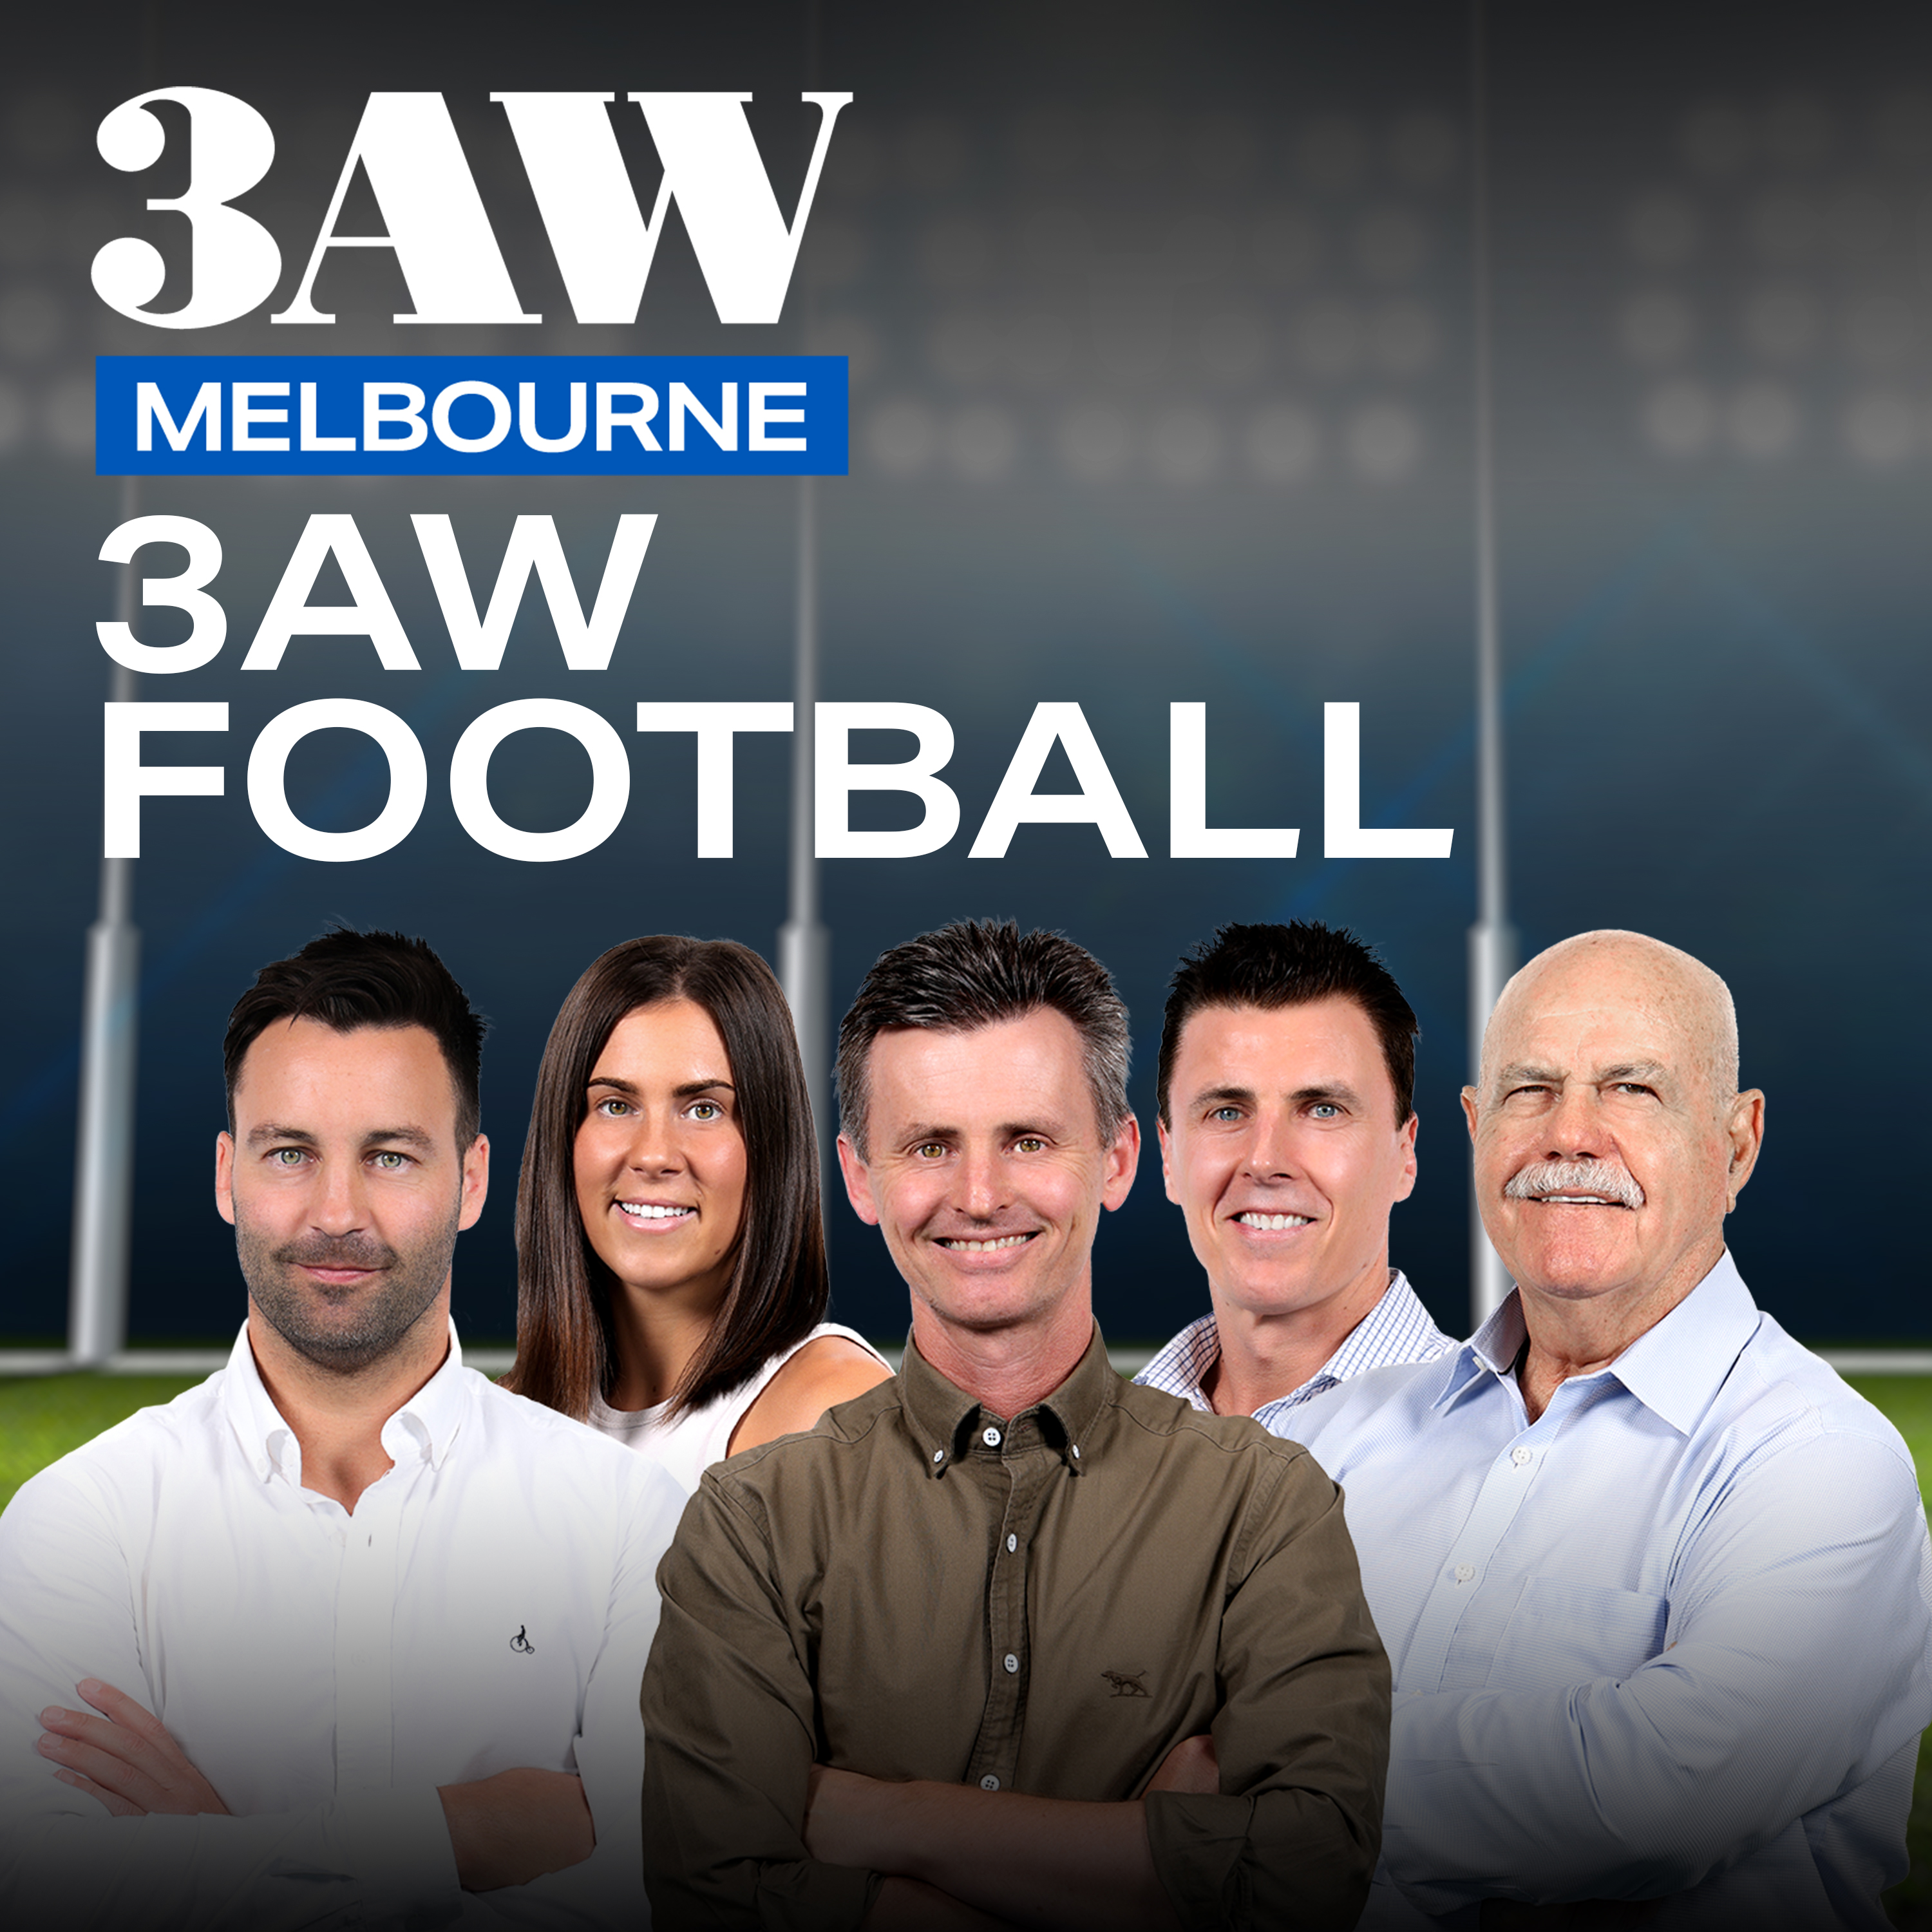 Former soldier Vince Dunn opens up on 3AW Football